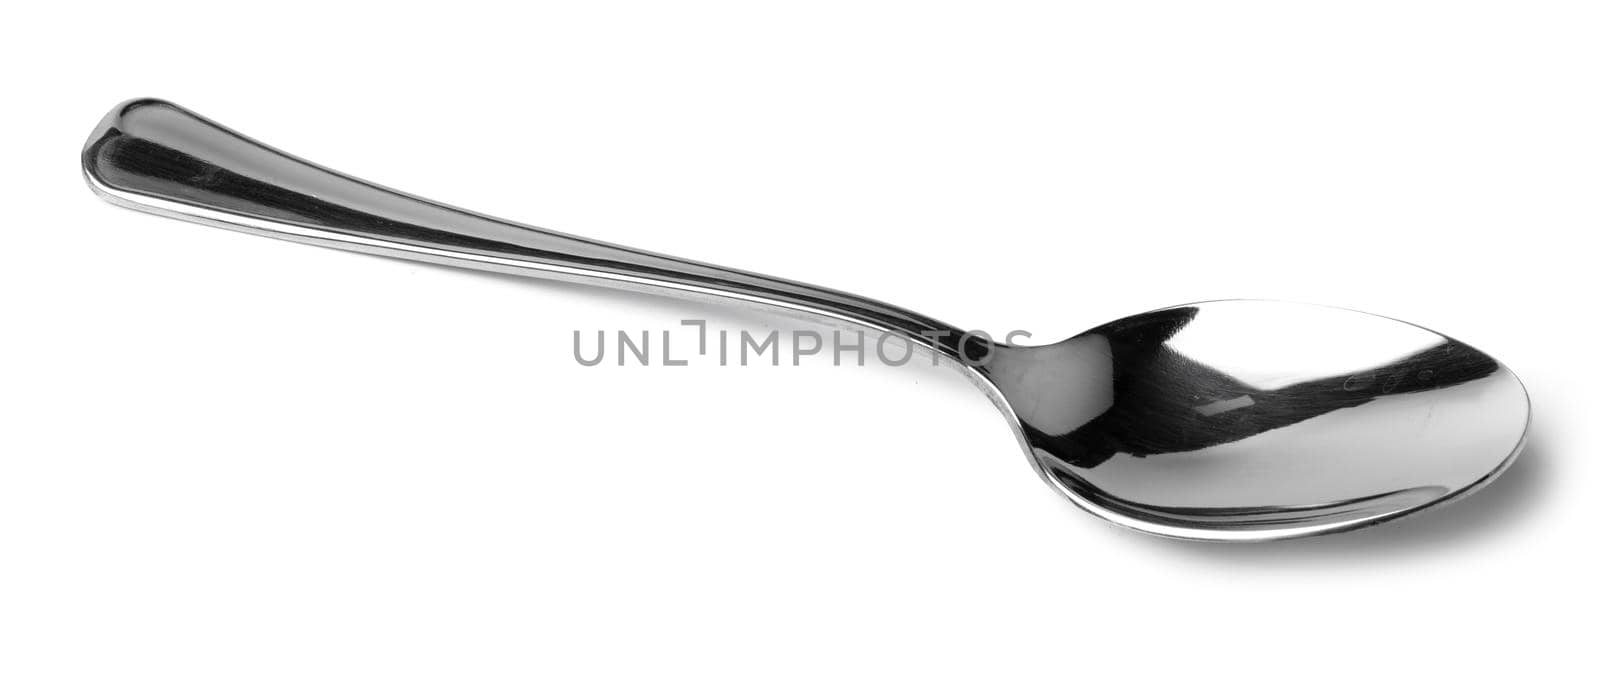 Silver spoon isolated on white background close up by Fabrikasimf